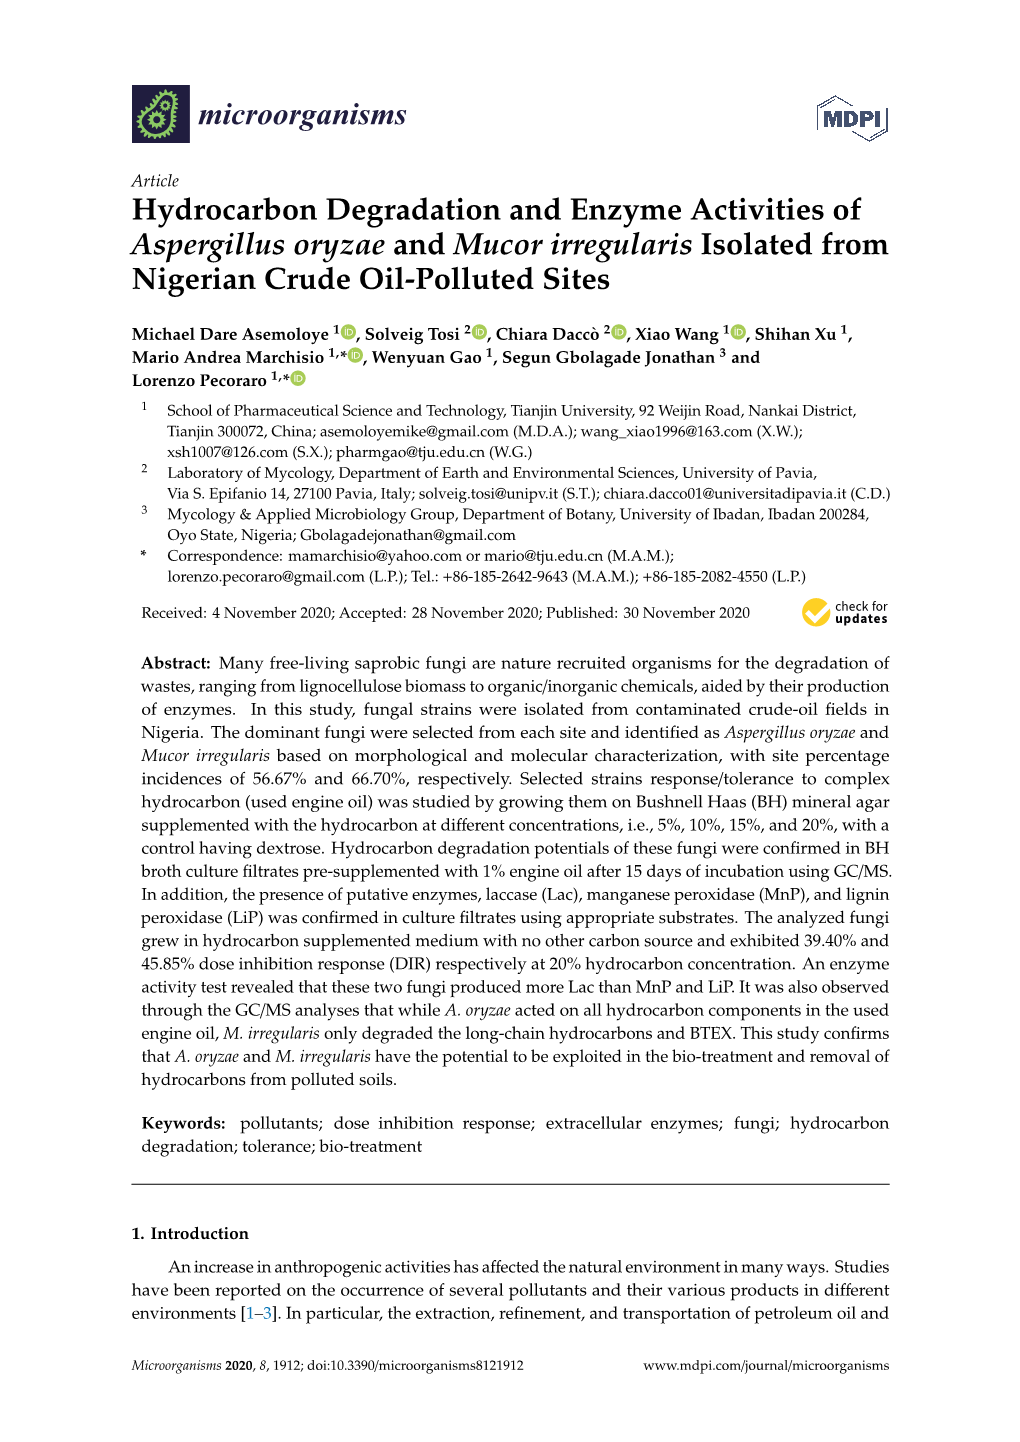 Hydrocarbon Degradation and Enzyme Activities of Aspergillus Oryzae and Mucor Irregularis Isolated from Nigerian Crude Oil-Polluted Sites